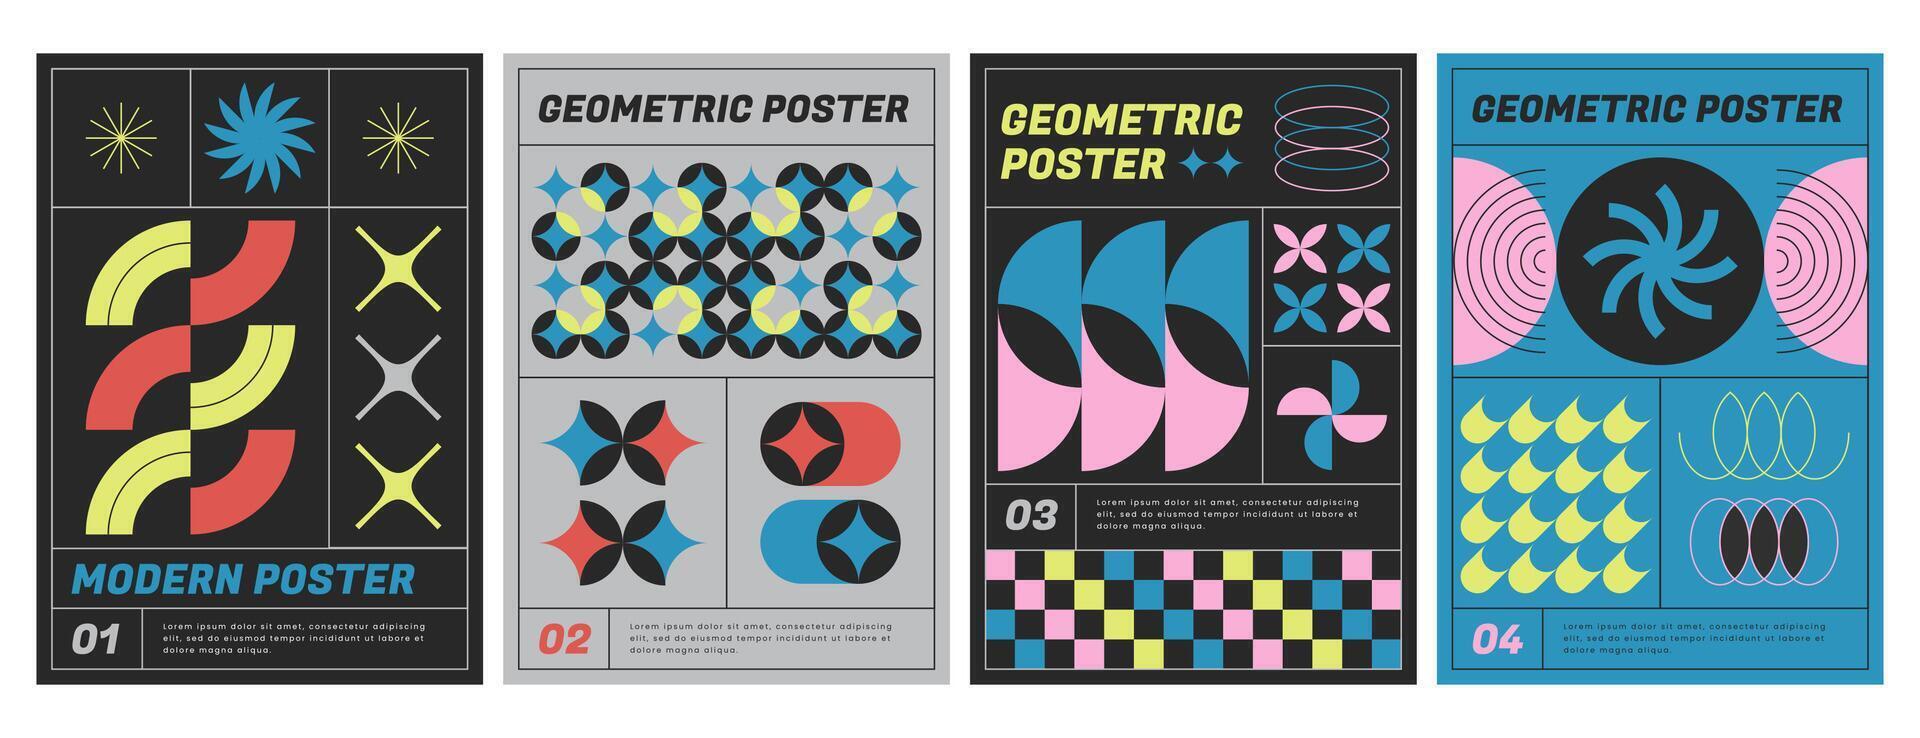 Modern aesthetics posters collection with abstract geometric shapes. Brutalist art style vector flyers with color graphic elements, basic figures and headers. Covers template with trendy prints